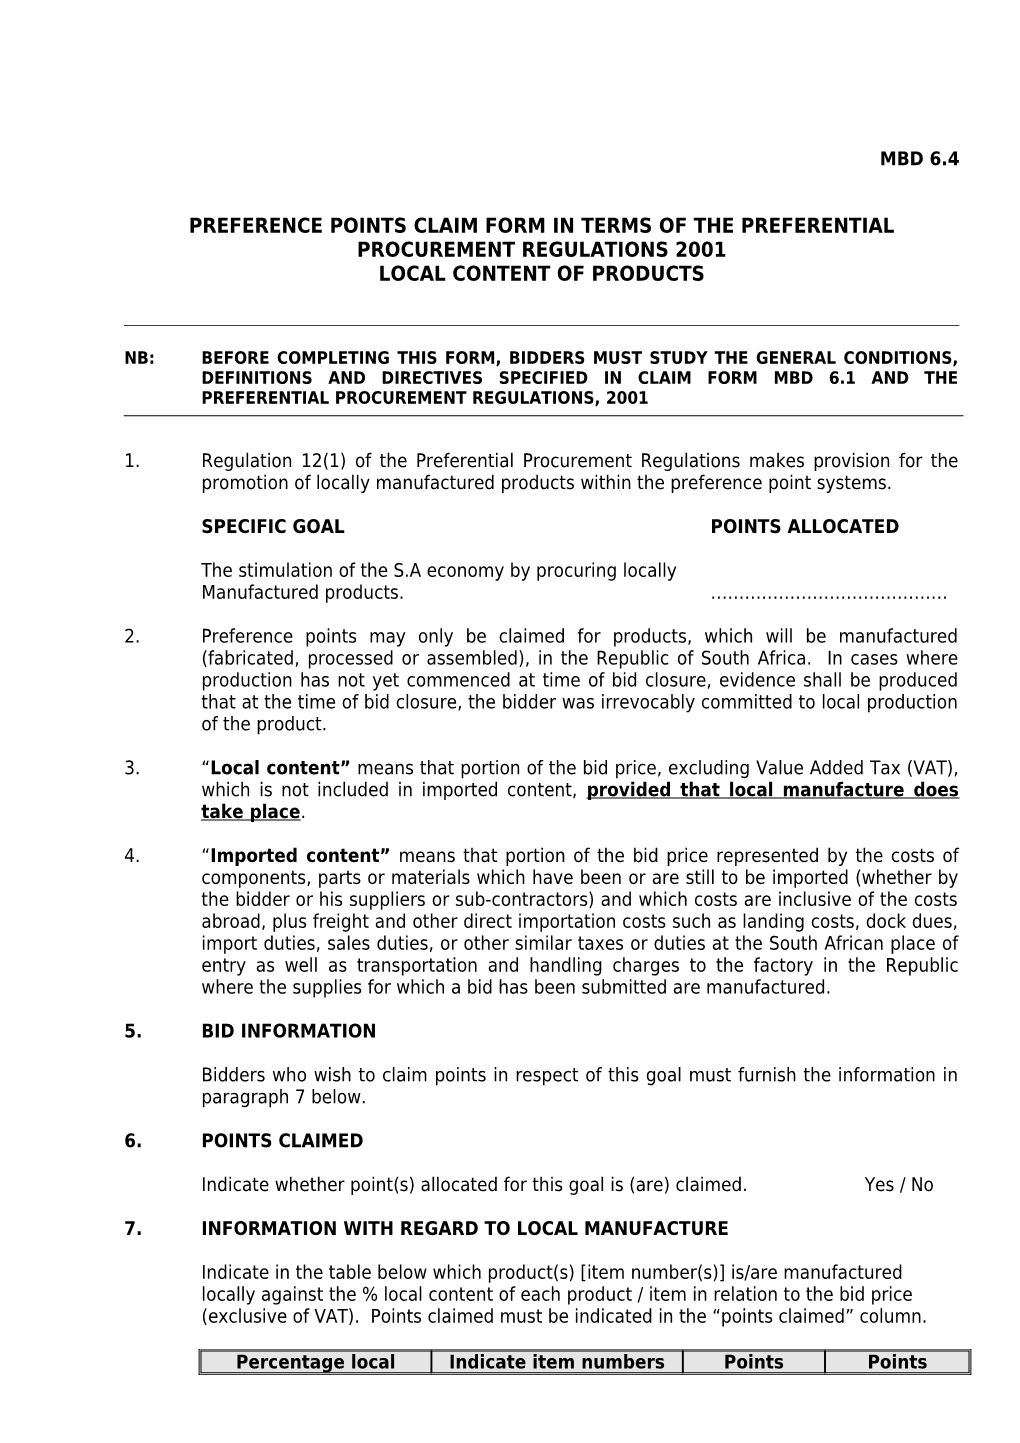 Preference Points Claim Form in Terms of the Preferential Procurement Regulations 2001